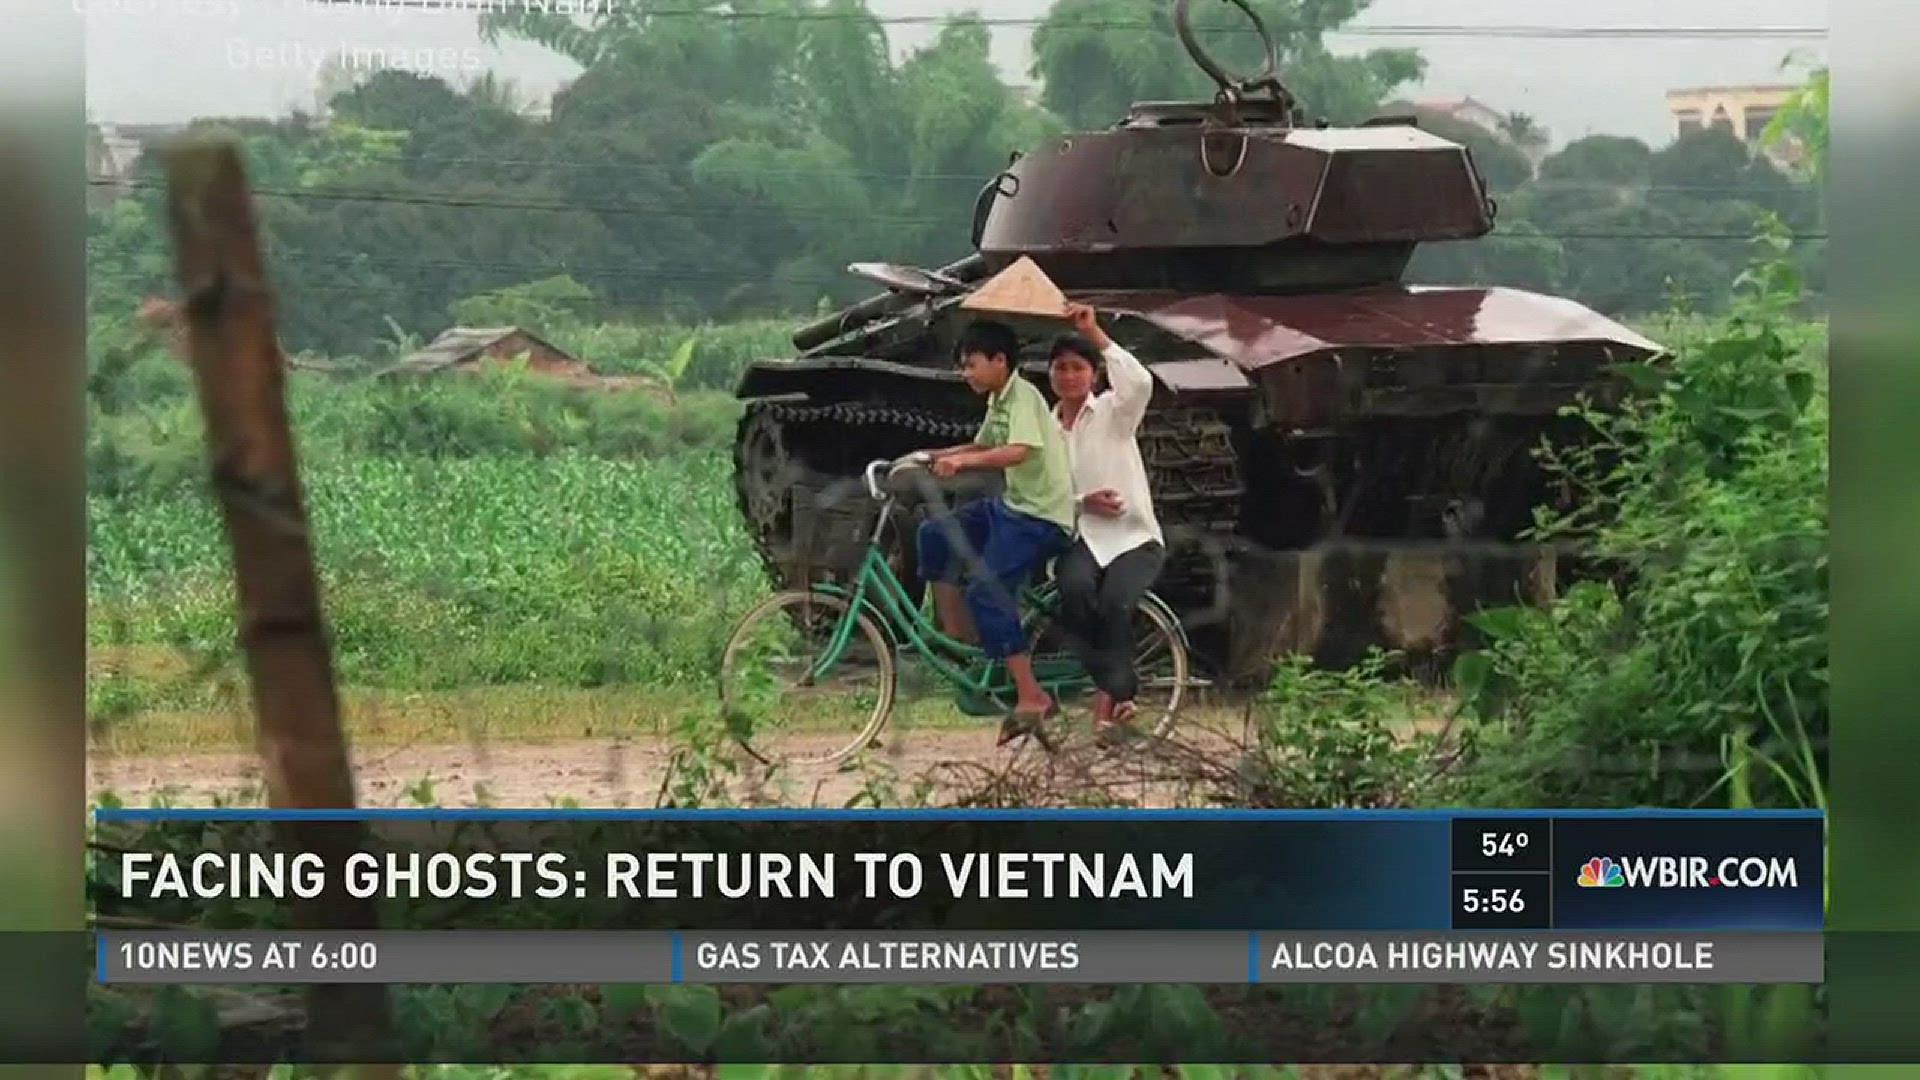 East Tennessee veterans are returning to Vietnam and 10News anchor John Becker is coming along to share the experience.